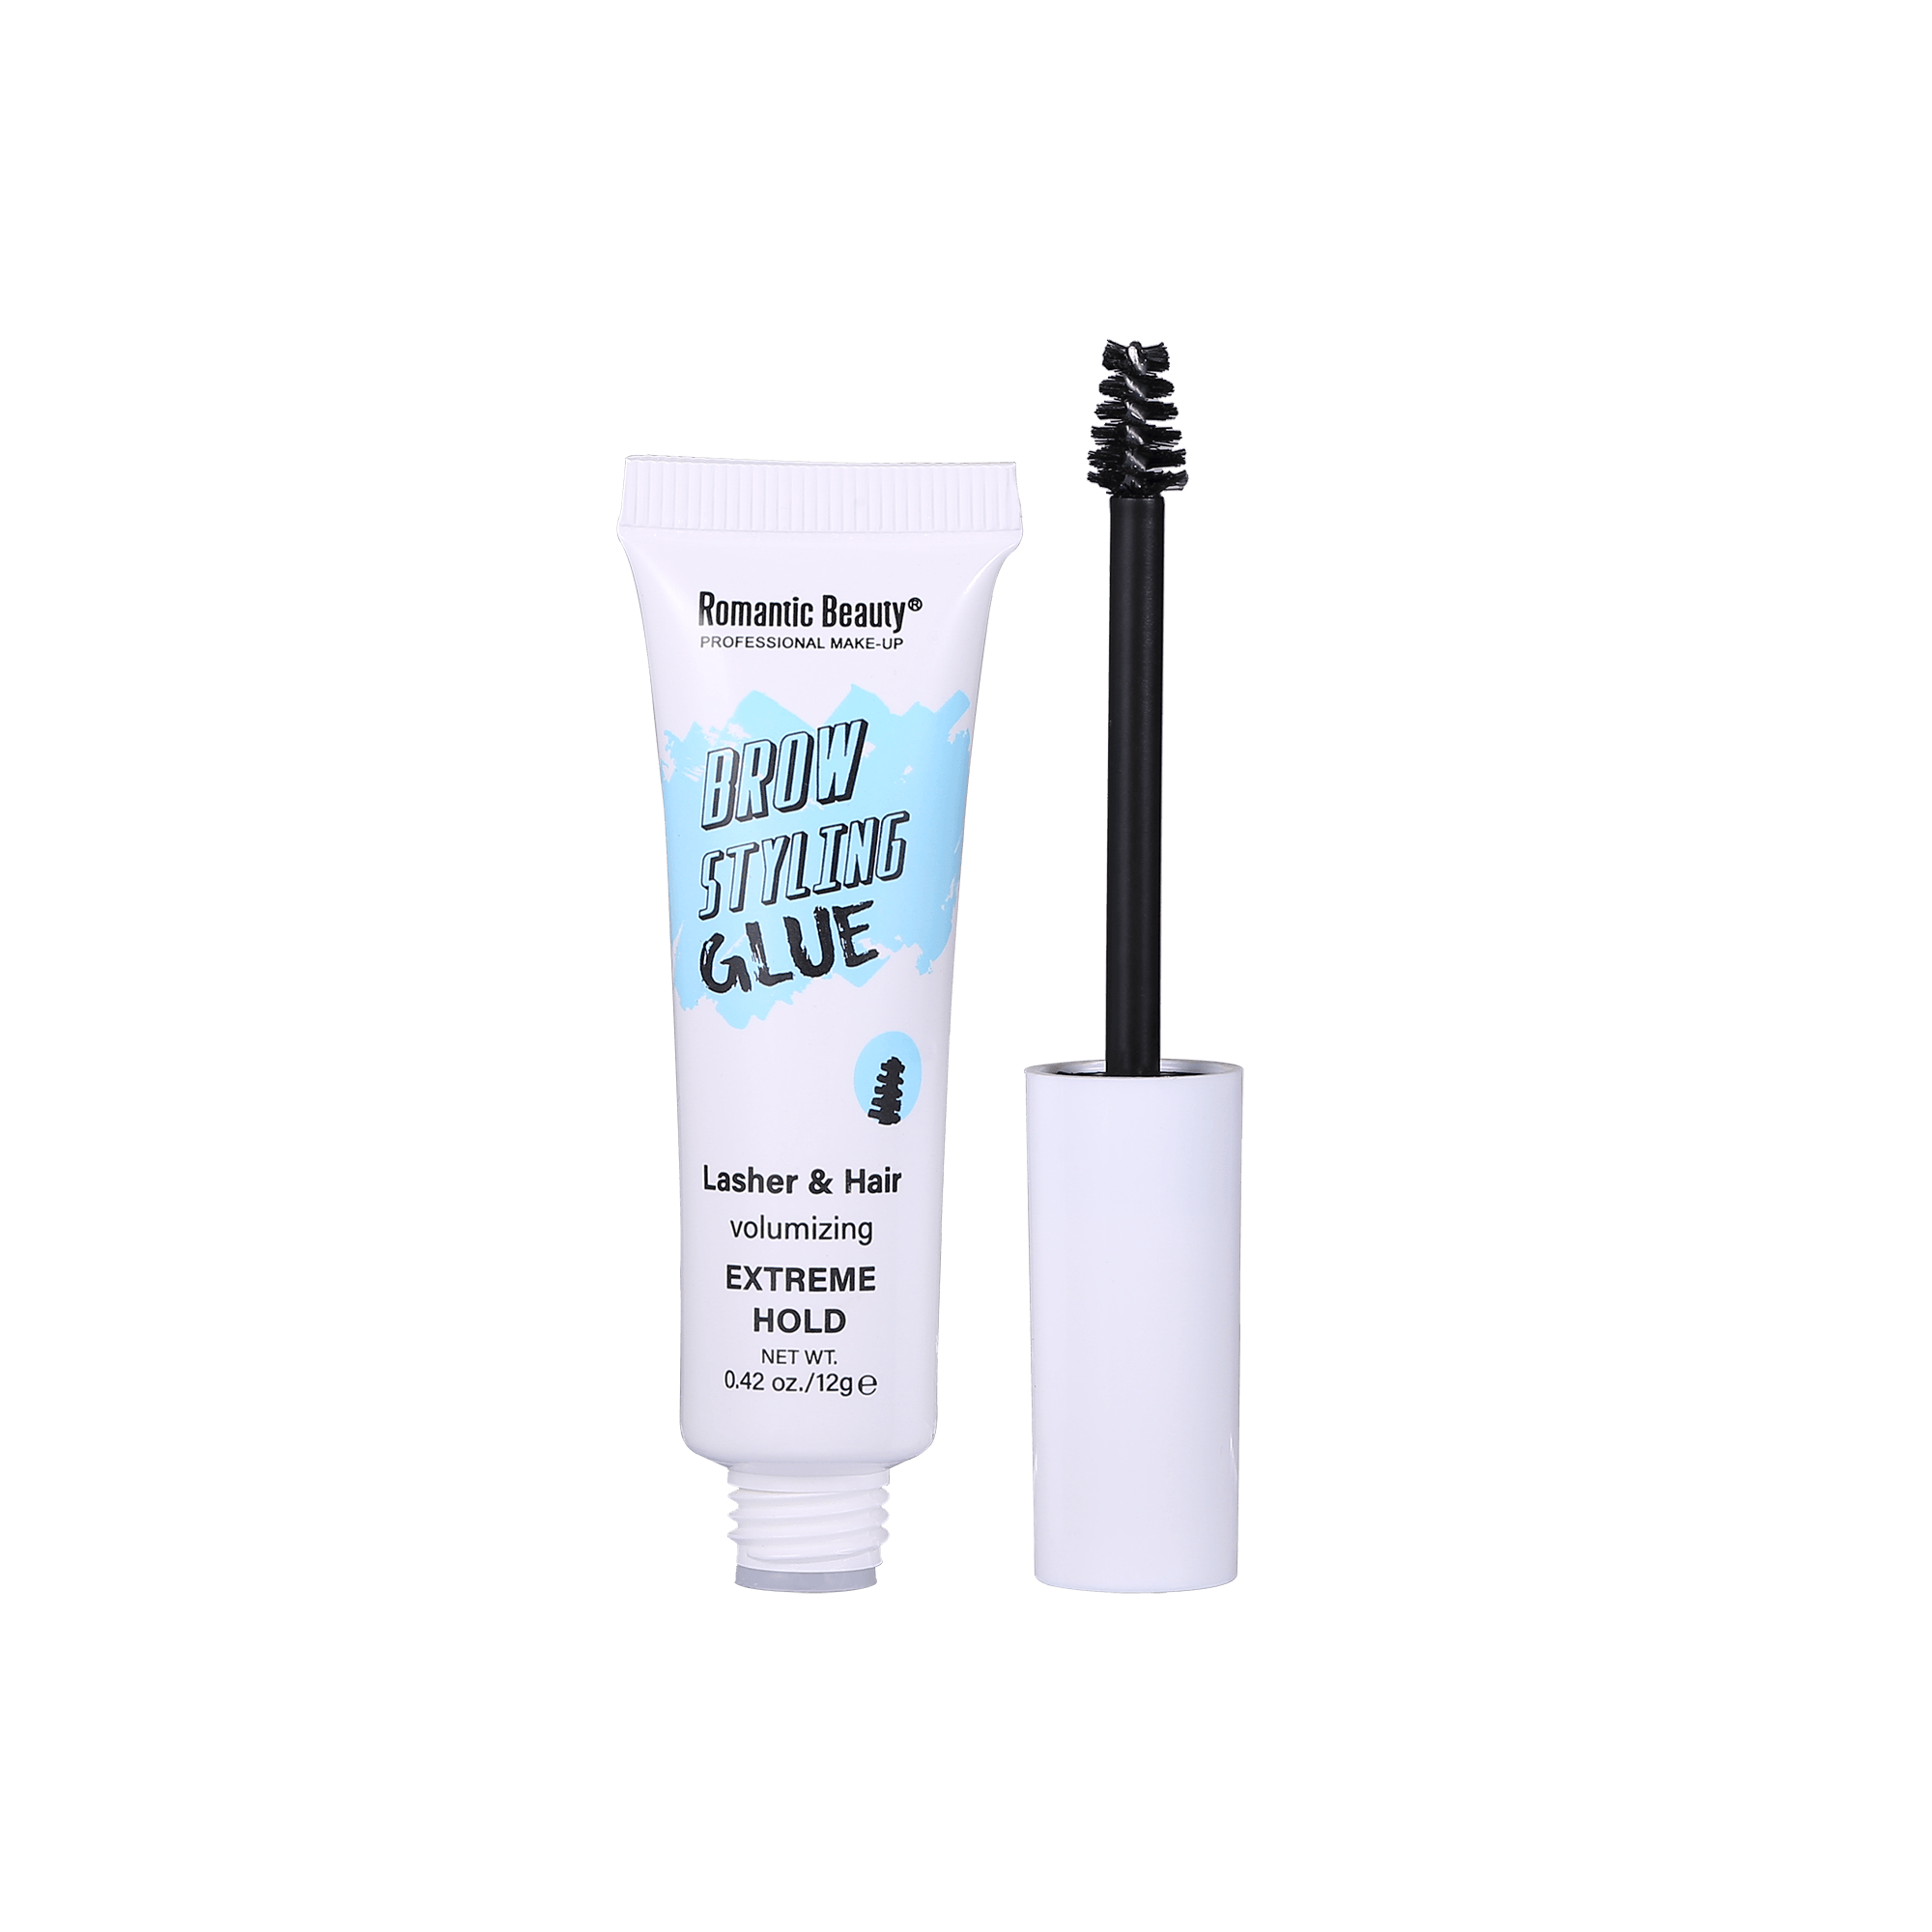 Pack 24 unidades. BROW STYLING GLUE